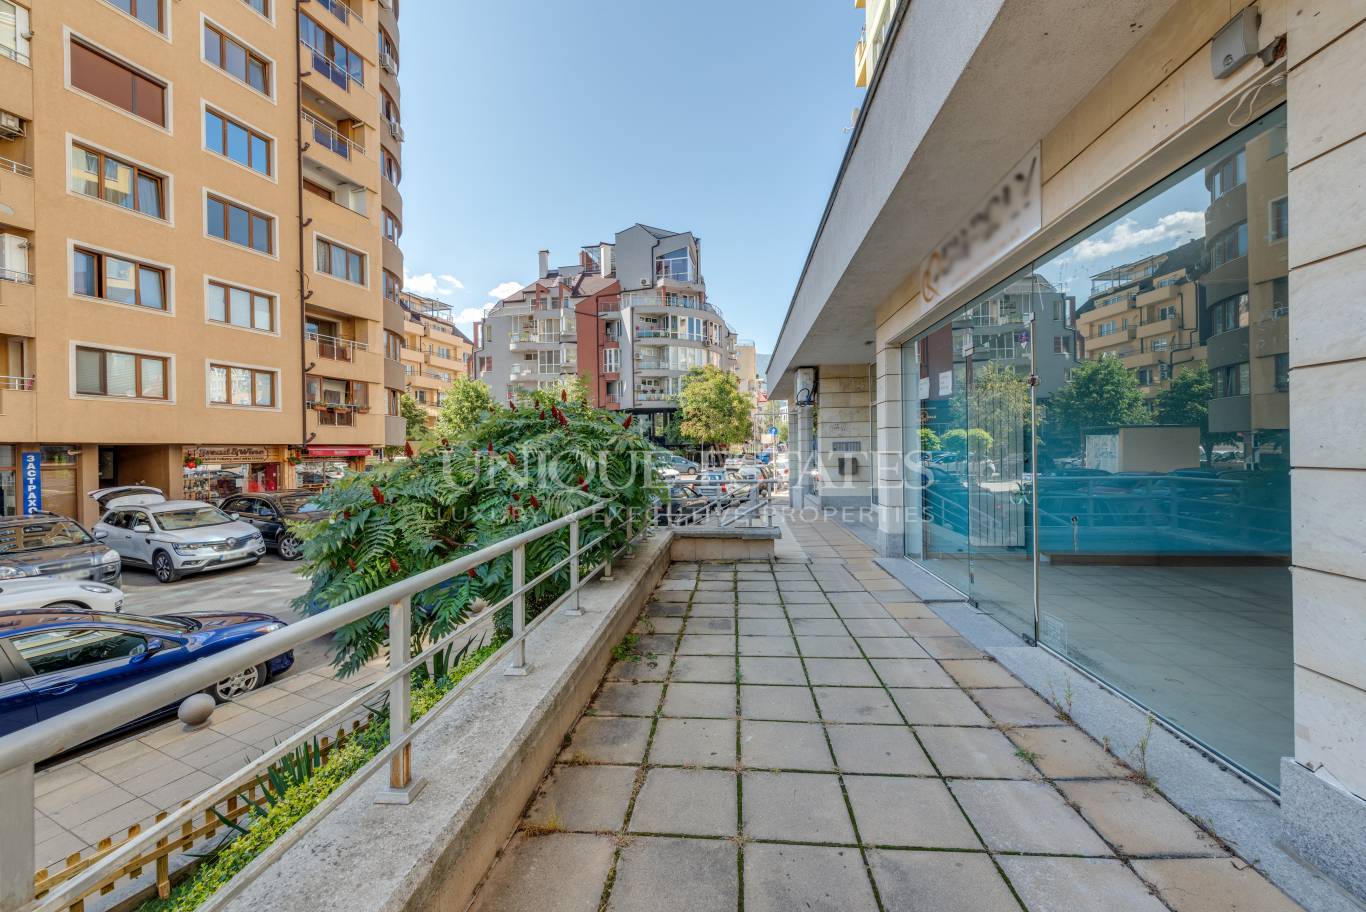 Commercial property for sale in Sofia, Manastirski livadi - West with listing ID: K13968 - image 5